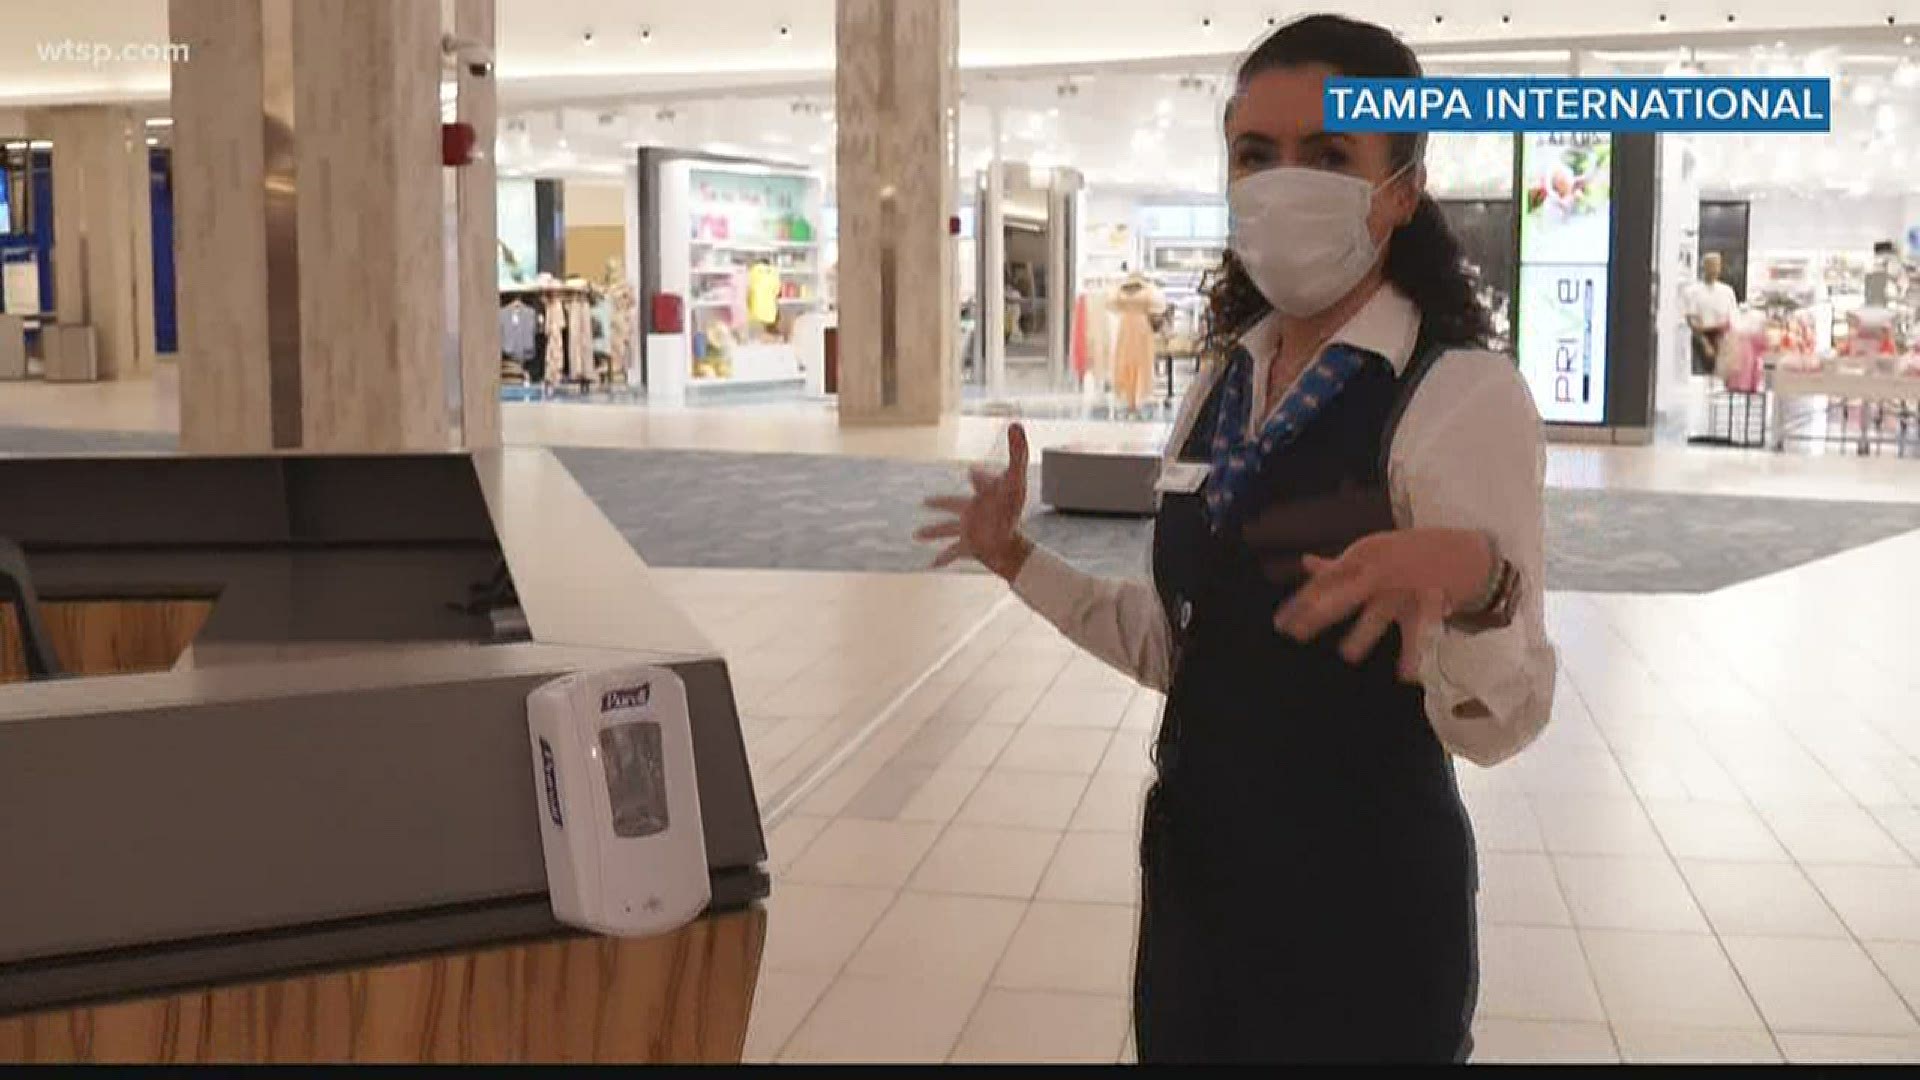 The TPA Ready initiative will see more frequent cleaning crews, plastic shields at high traffic areas and employees wearing face masks.